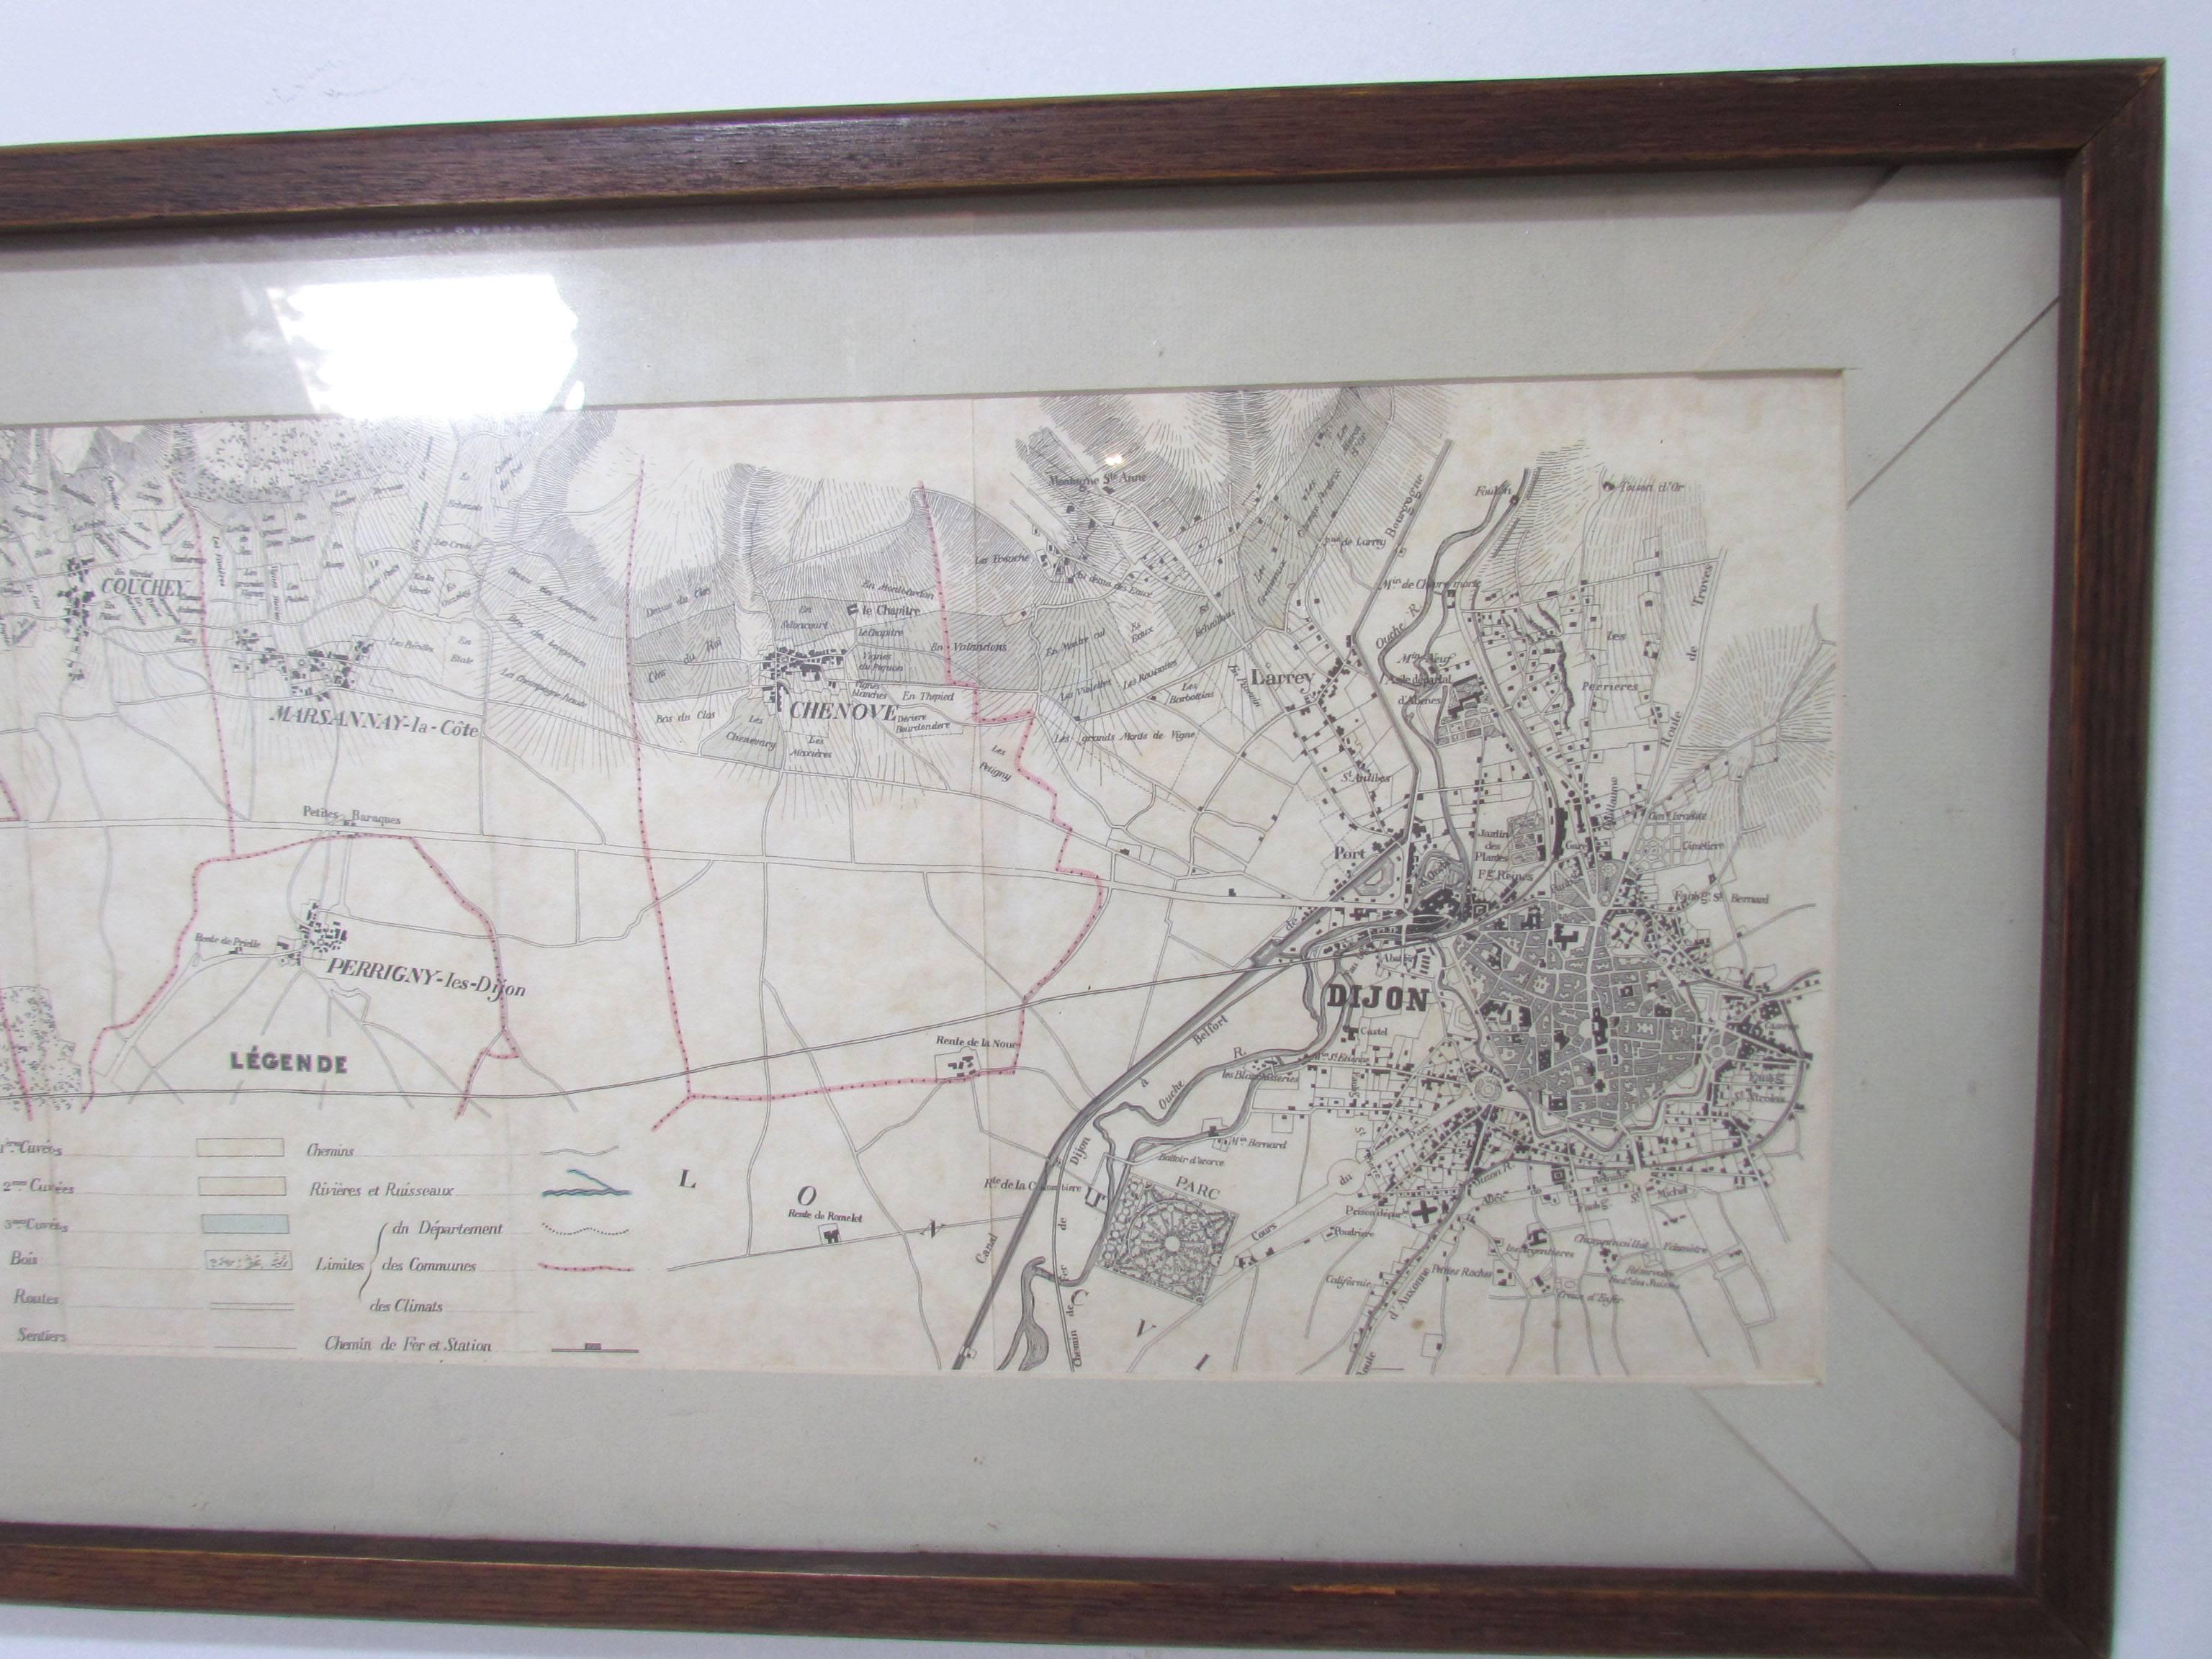 Early 20th Century Panoramic Antique Lithographic Map for Louis Latour, Burgundy France Region